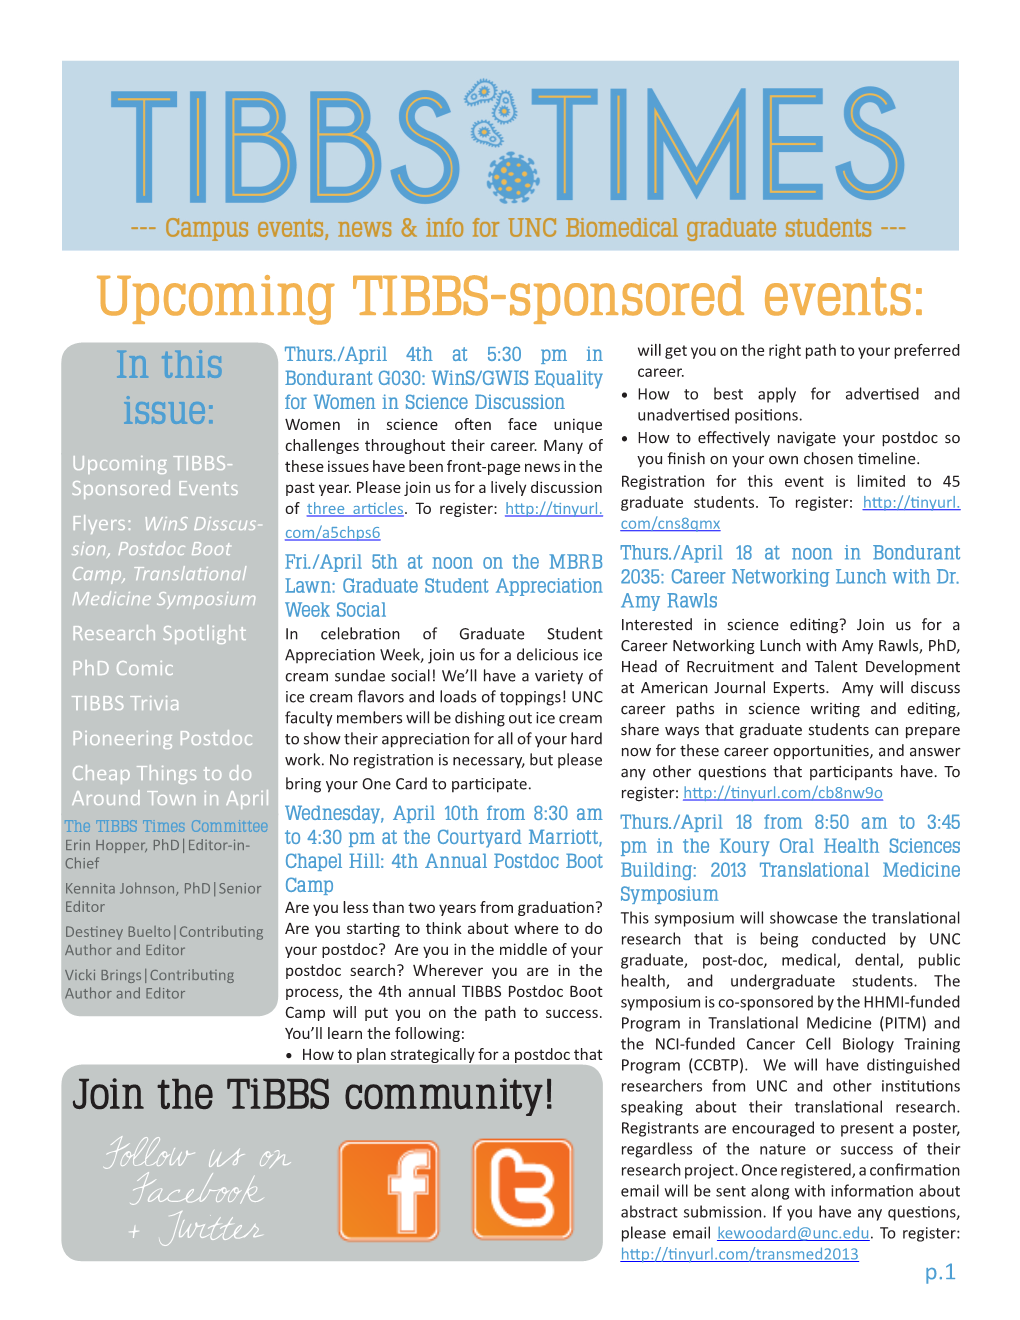 Upcoming TIBBS-Sponsored Events: Thurs./April 4Th at 5:30 Pm in Will Get You on the Right Path to Your Preferred in This Bondurant G030: Wins/GWIS Equality Career